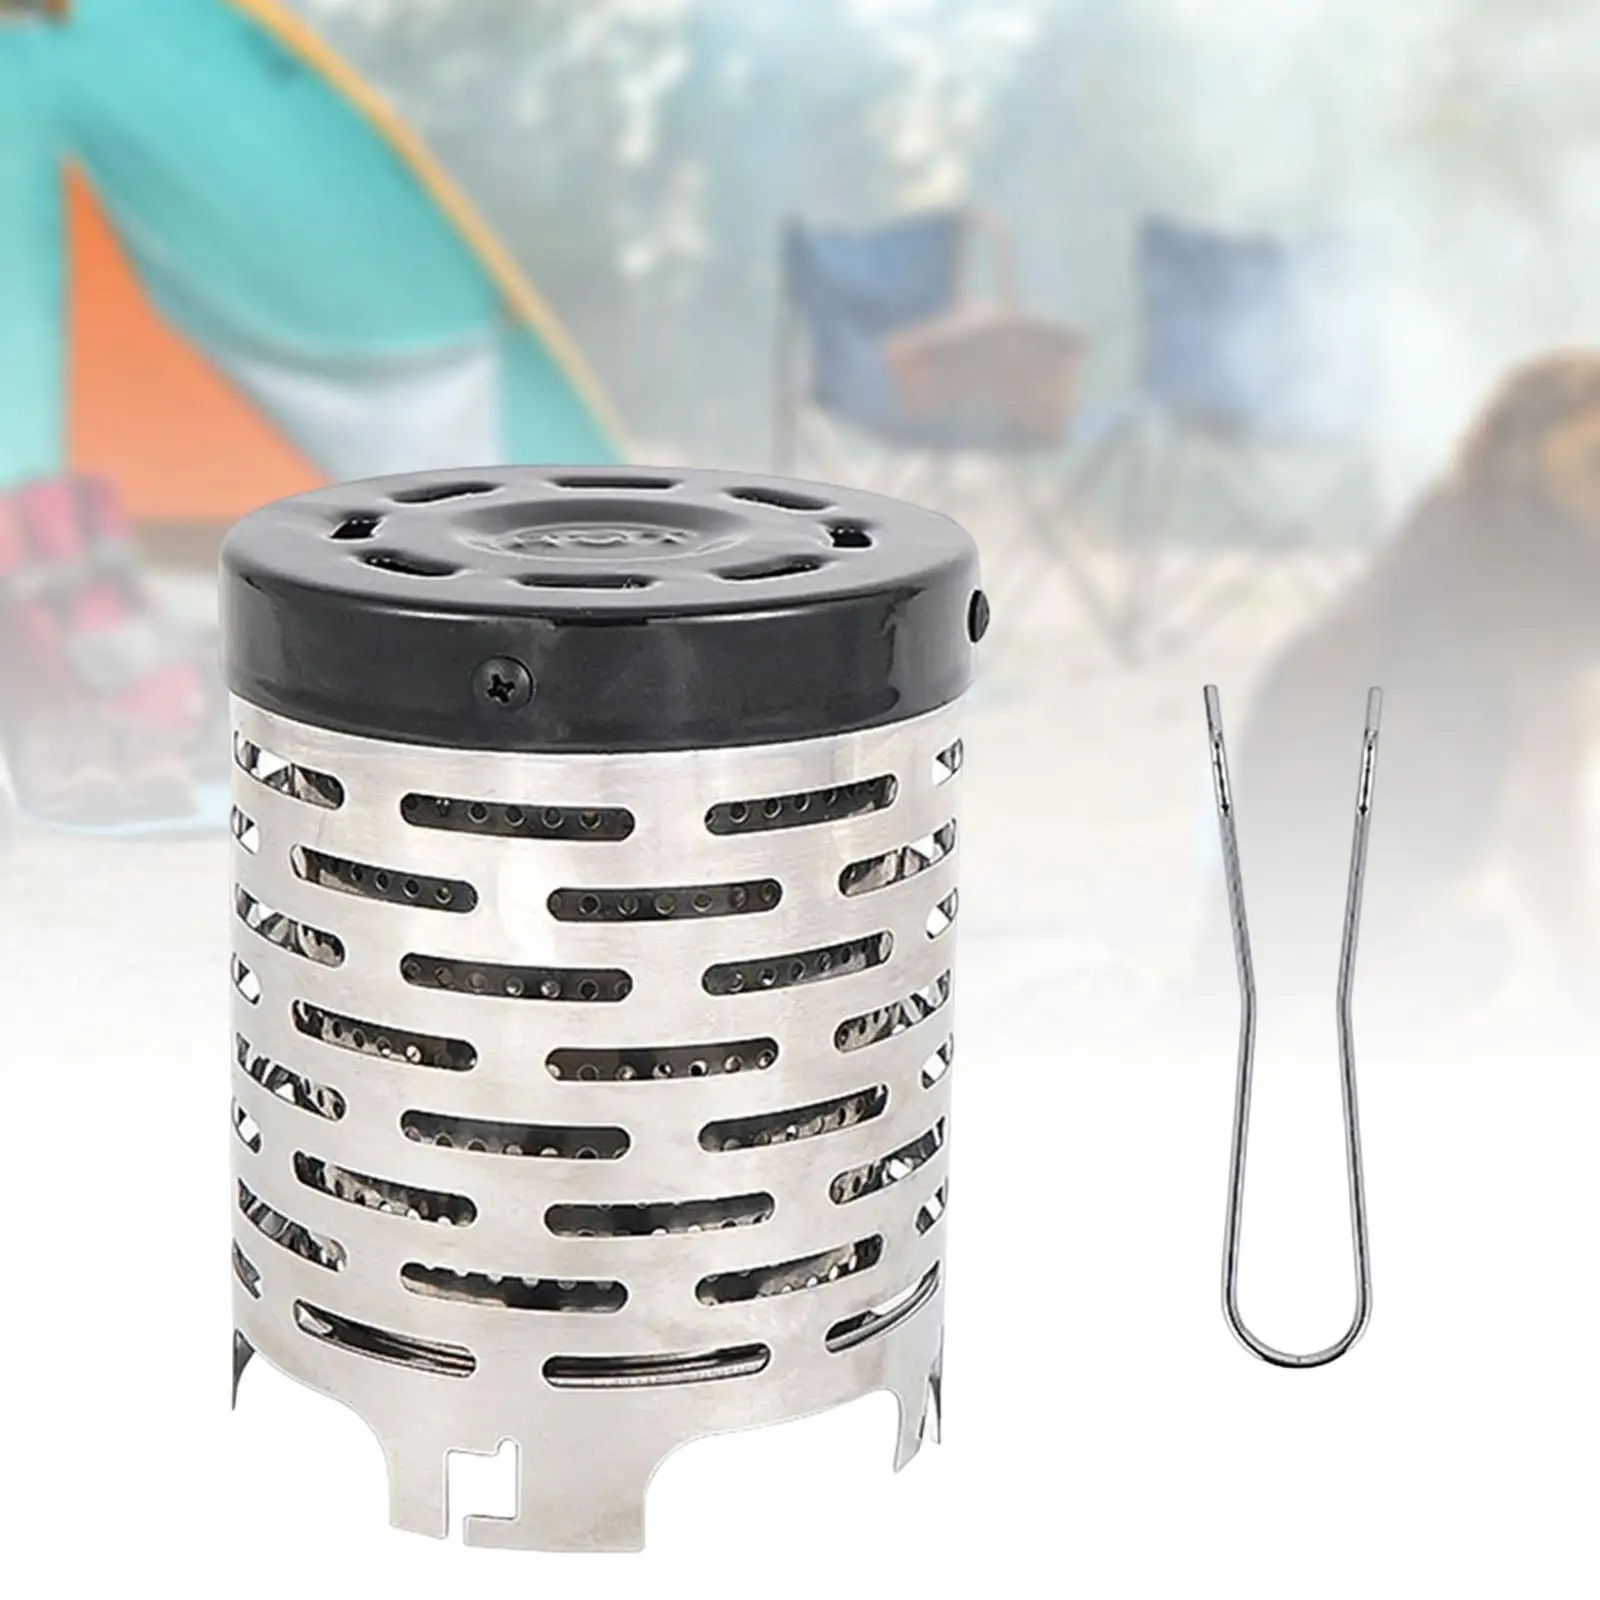 Outdoor Camping Mini Heater Tent Heating Cover Portable Camping Equipment Stainless Steel Warming Stove Cover for Backpacking